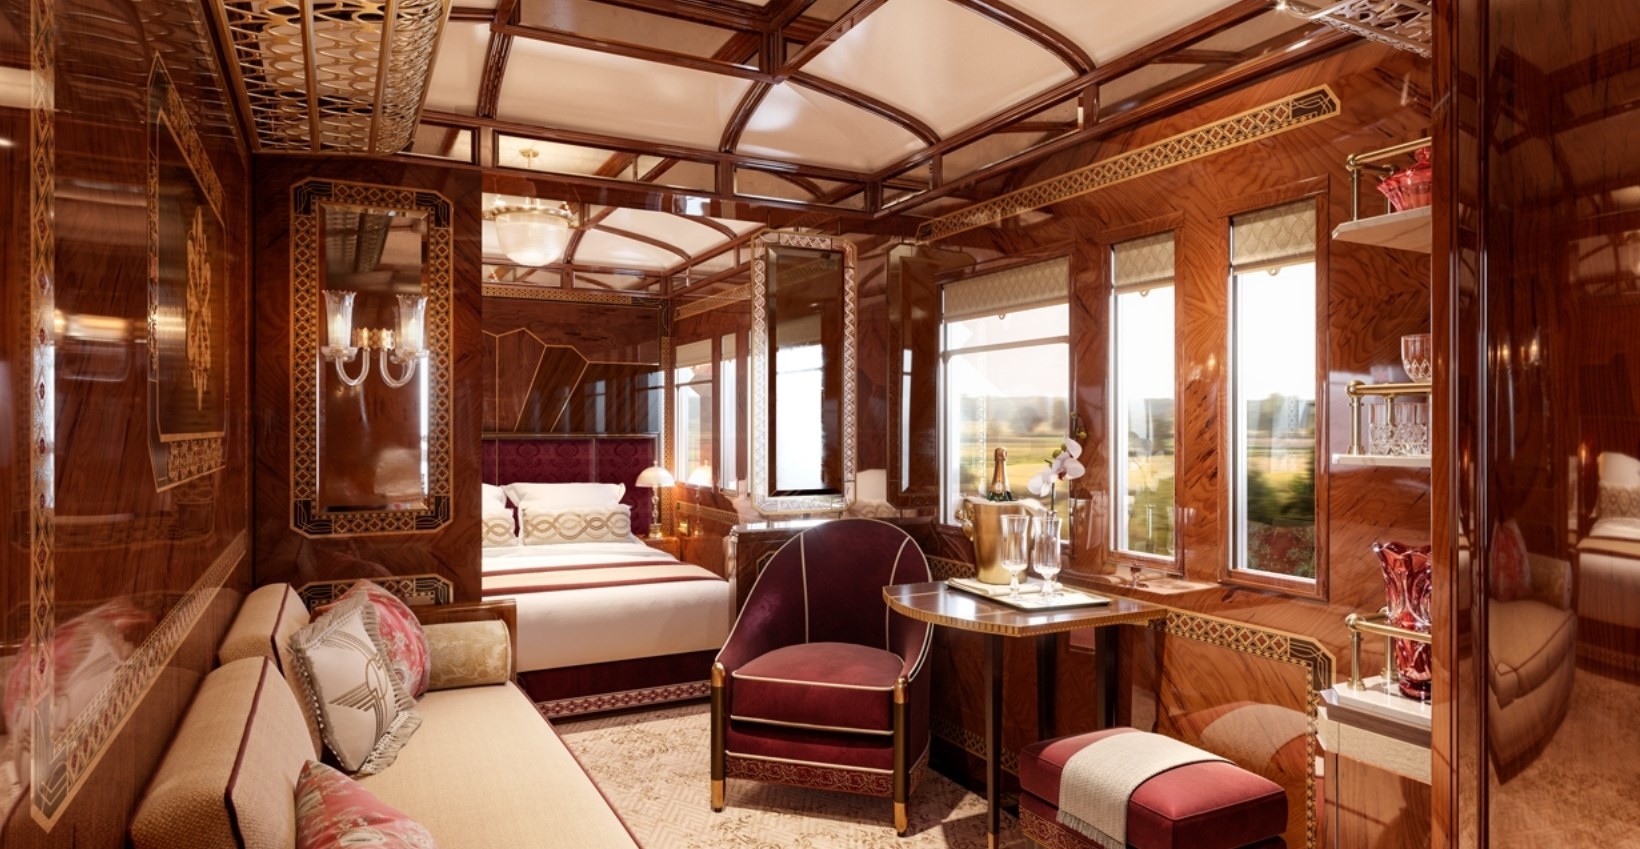 news-main-the-venice-simplon-orient-express-debuts-three-new-grand-suites-for-the-2020-season.1582197710.jpg